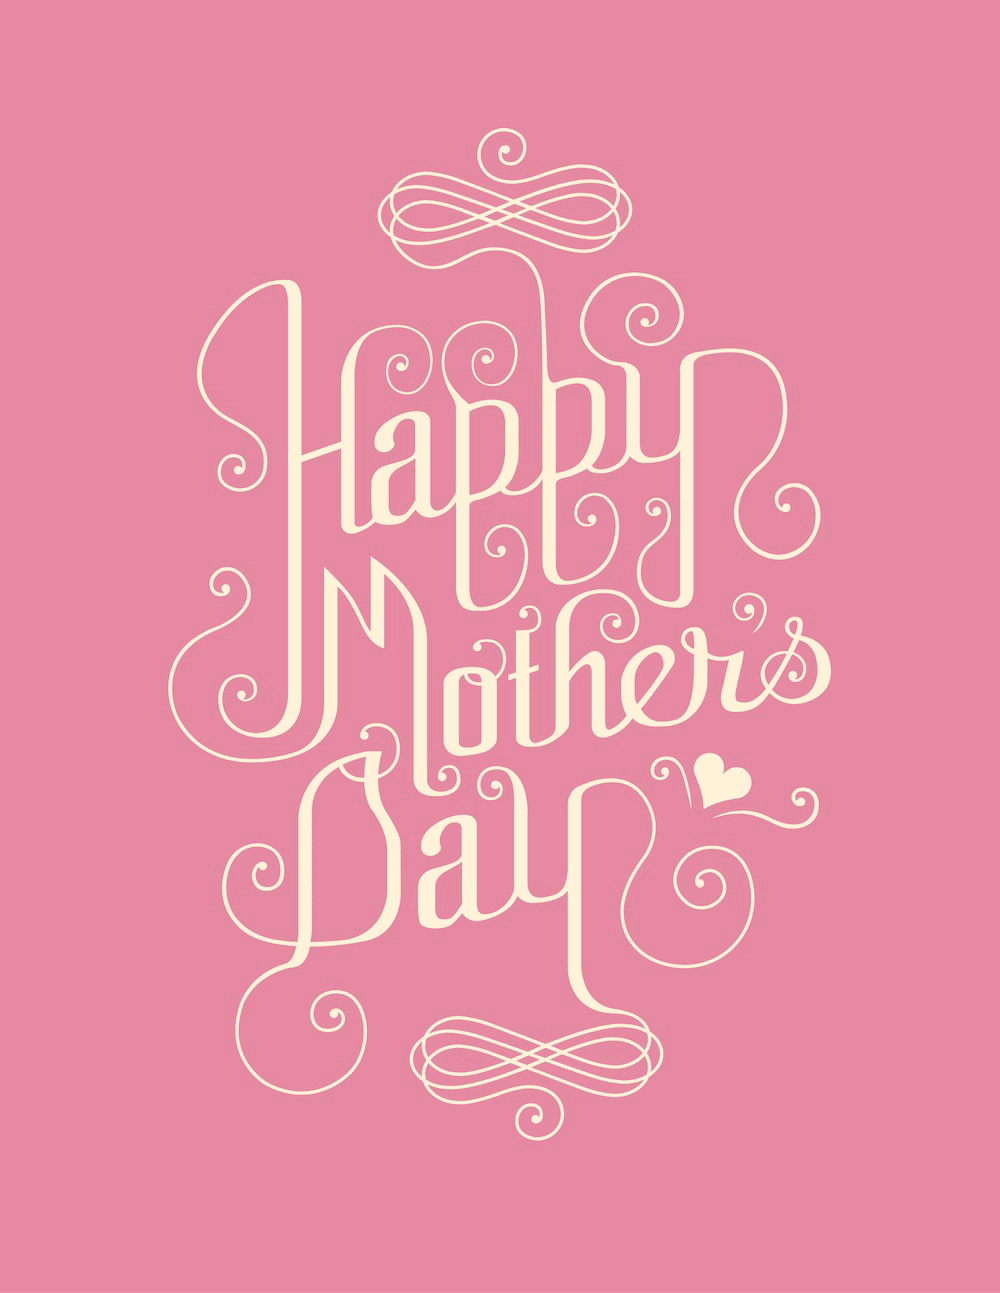 30 Free Printable Vector PSD Happy Mother s Day Cards 2014 Designbolts